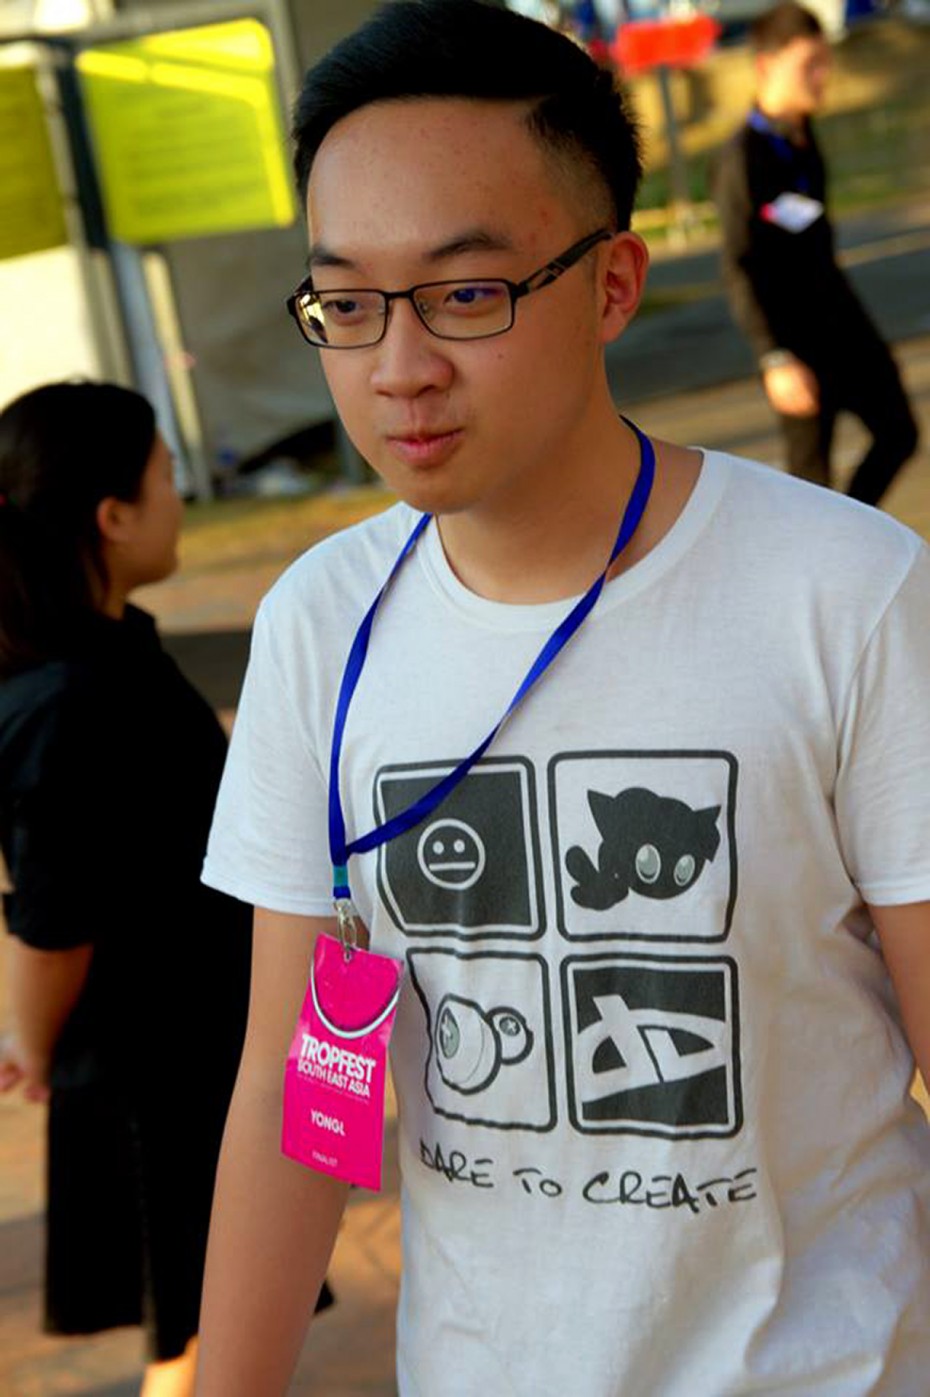 Tan Yong Lin is 18 and in the first year of a degree in animation and visual effects, but wowed the judges at Tropfest 2015.